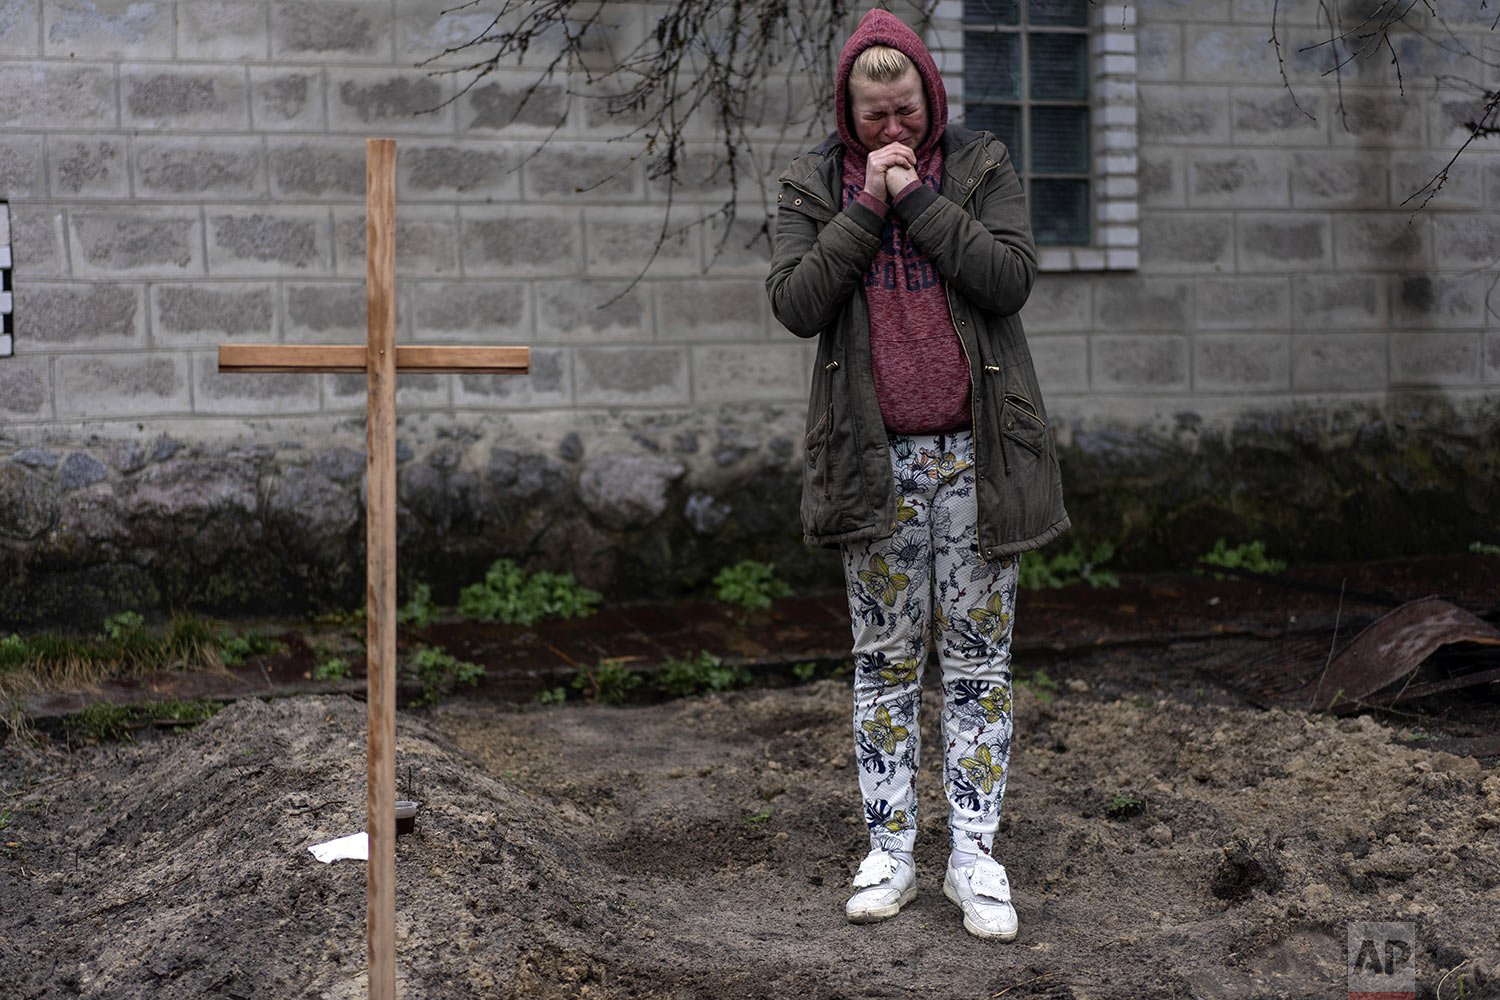  Mariya Ol'hovs'ka mourns the death of her 72-year-old father Valerii Ol'hovs'kyi, killed by a Russian missile on March 30 near his house, on the outskirts of Kyiv, Ukraine, Friday, April 1, 2022. (AP Photo/Rodrigo Abd) 